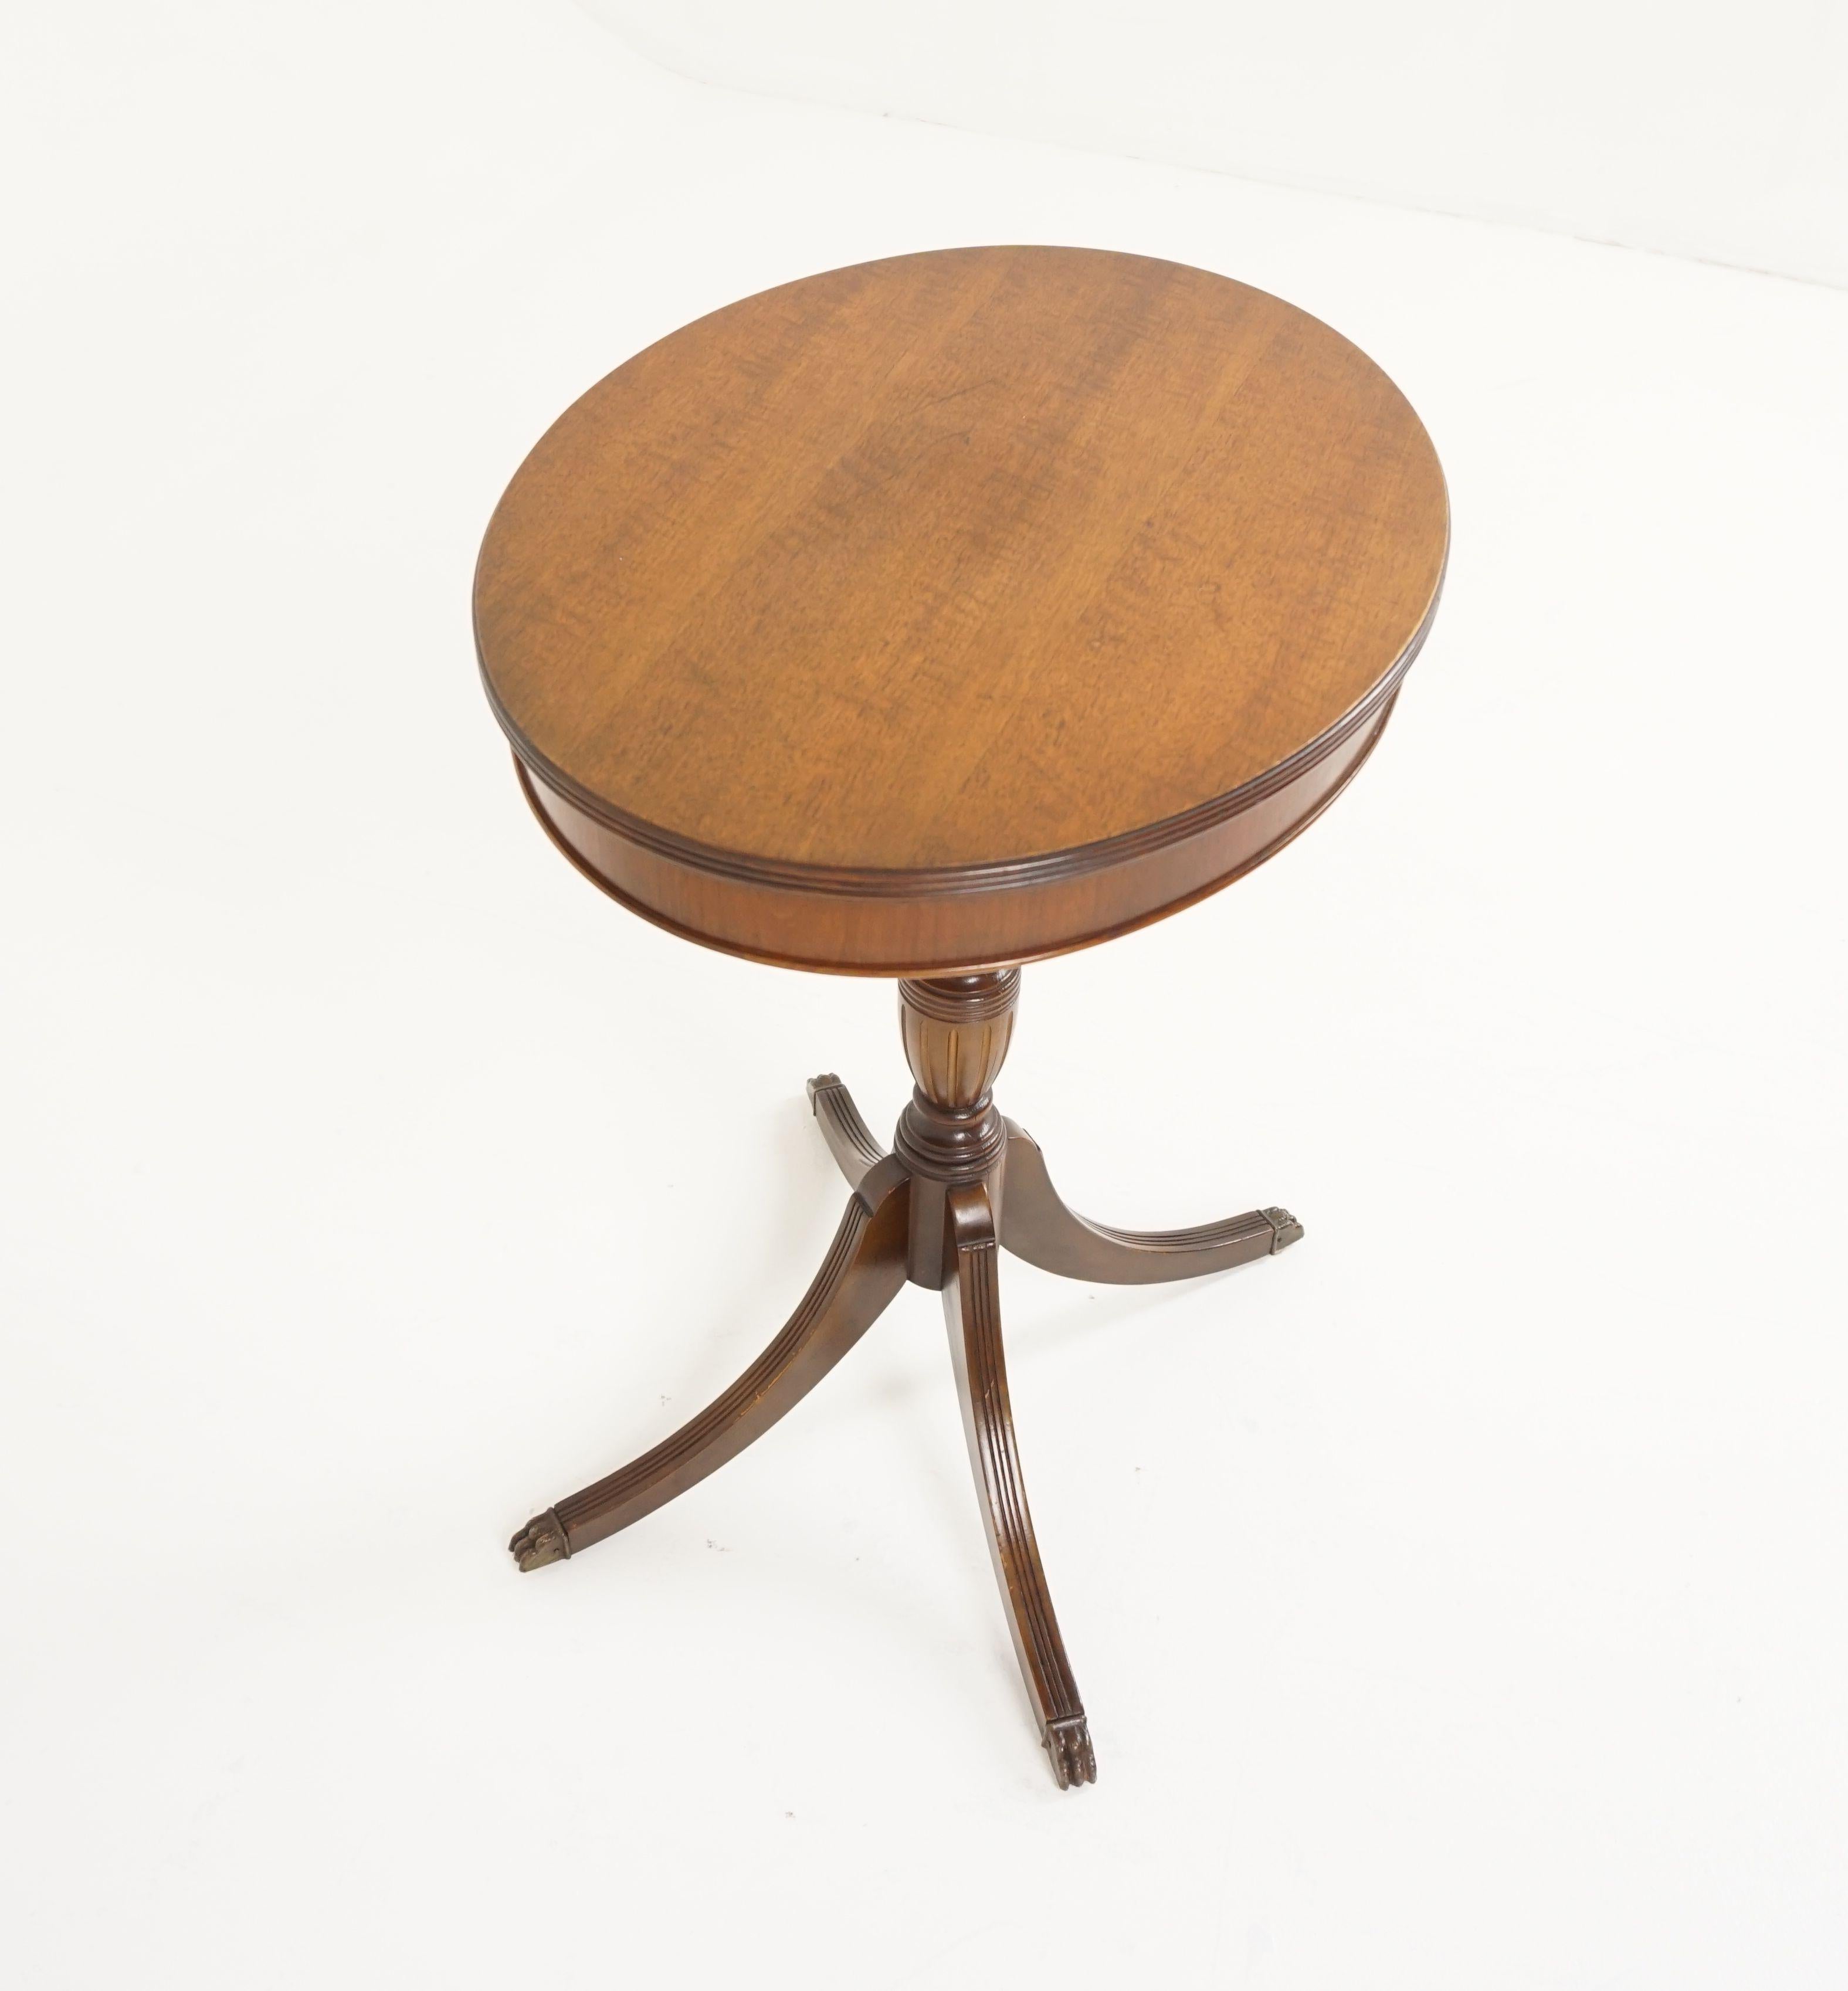 Hand-Crafted Vintage Oval Walnut Table, Duncan Phyfe, on Tripod Base, America 1930s, B2051